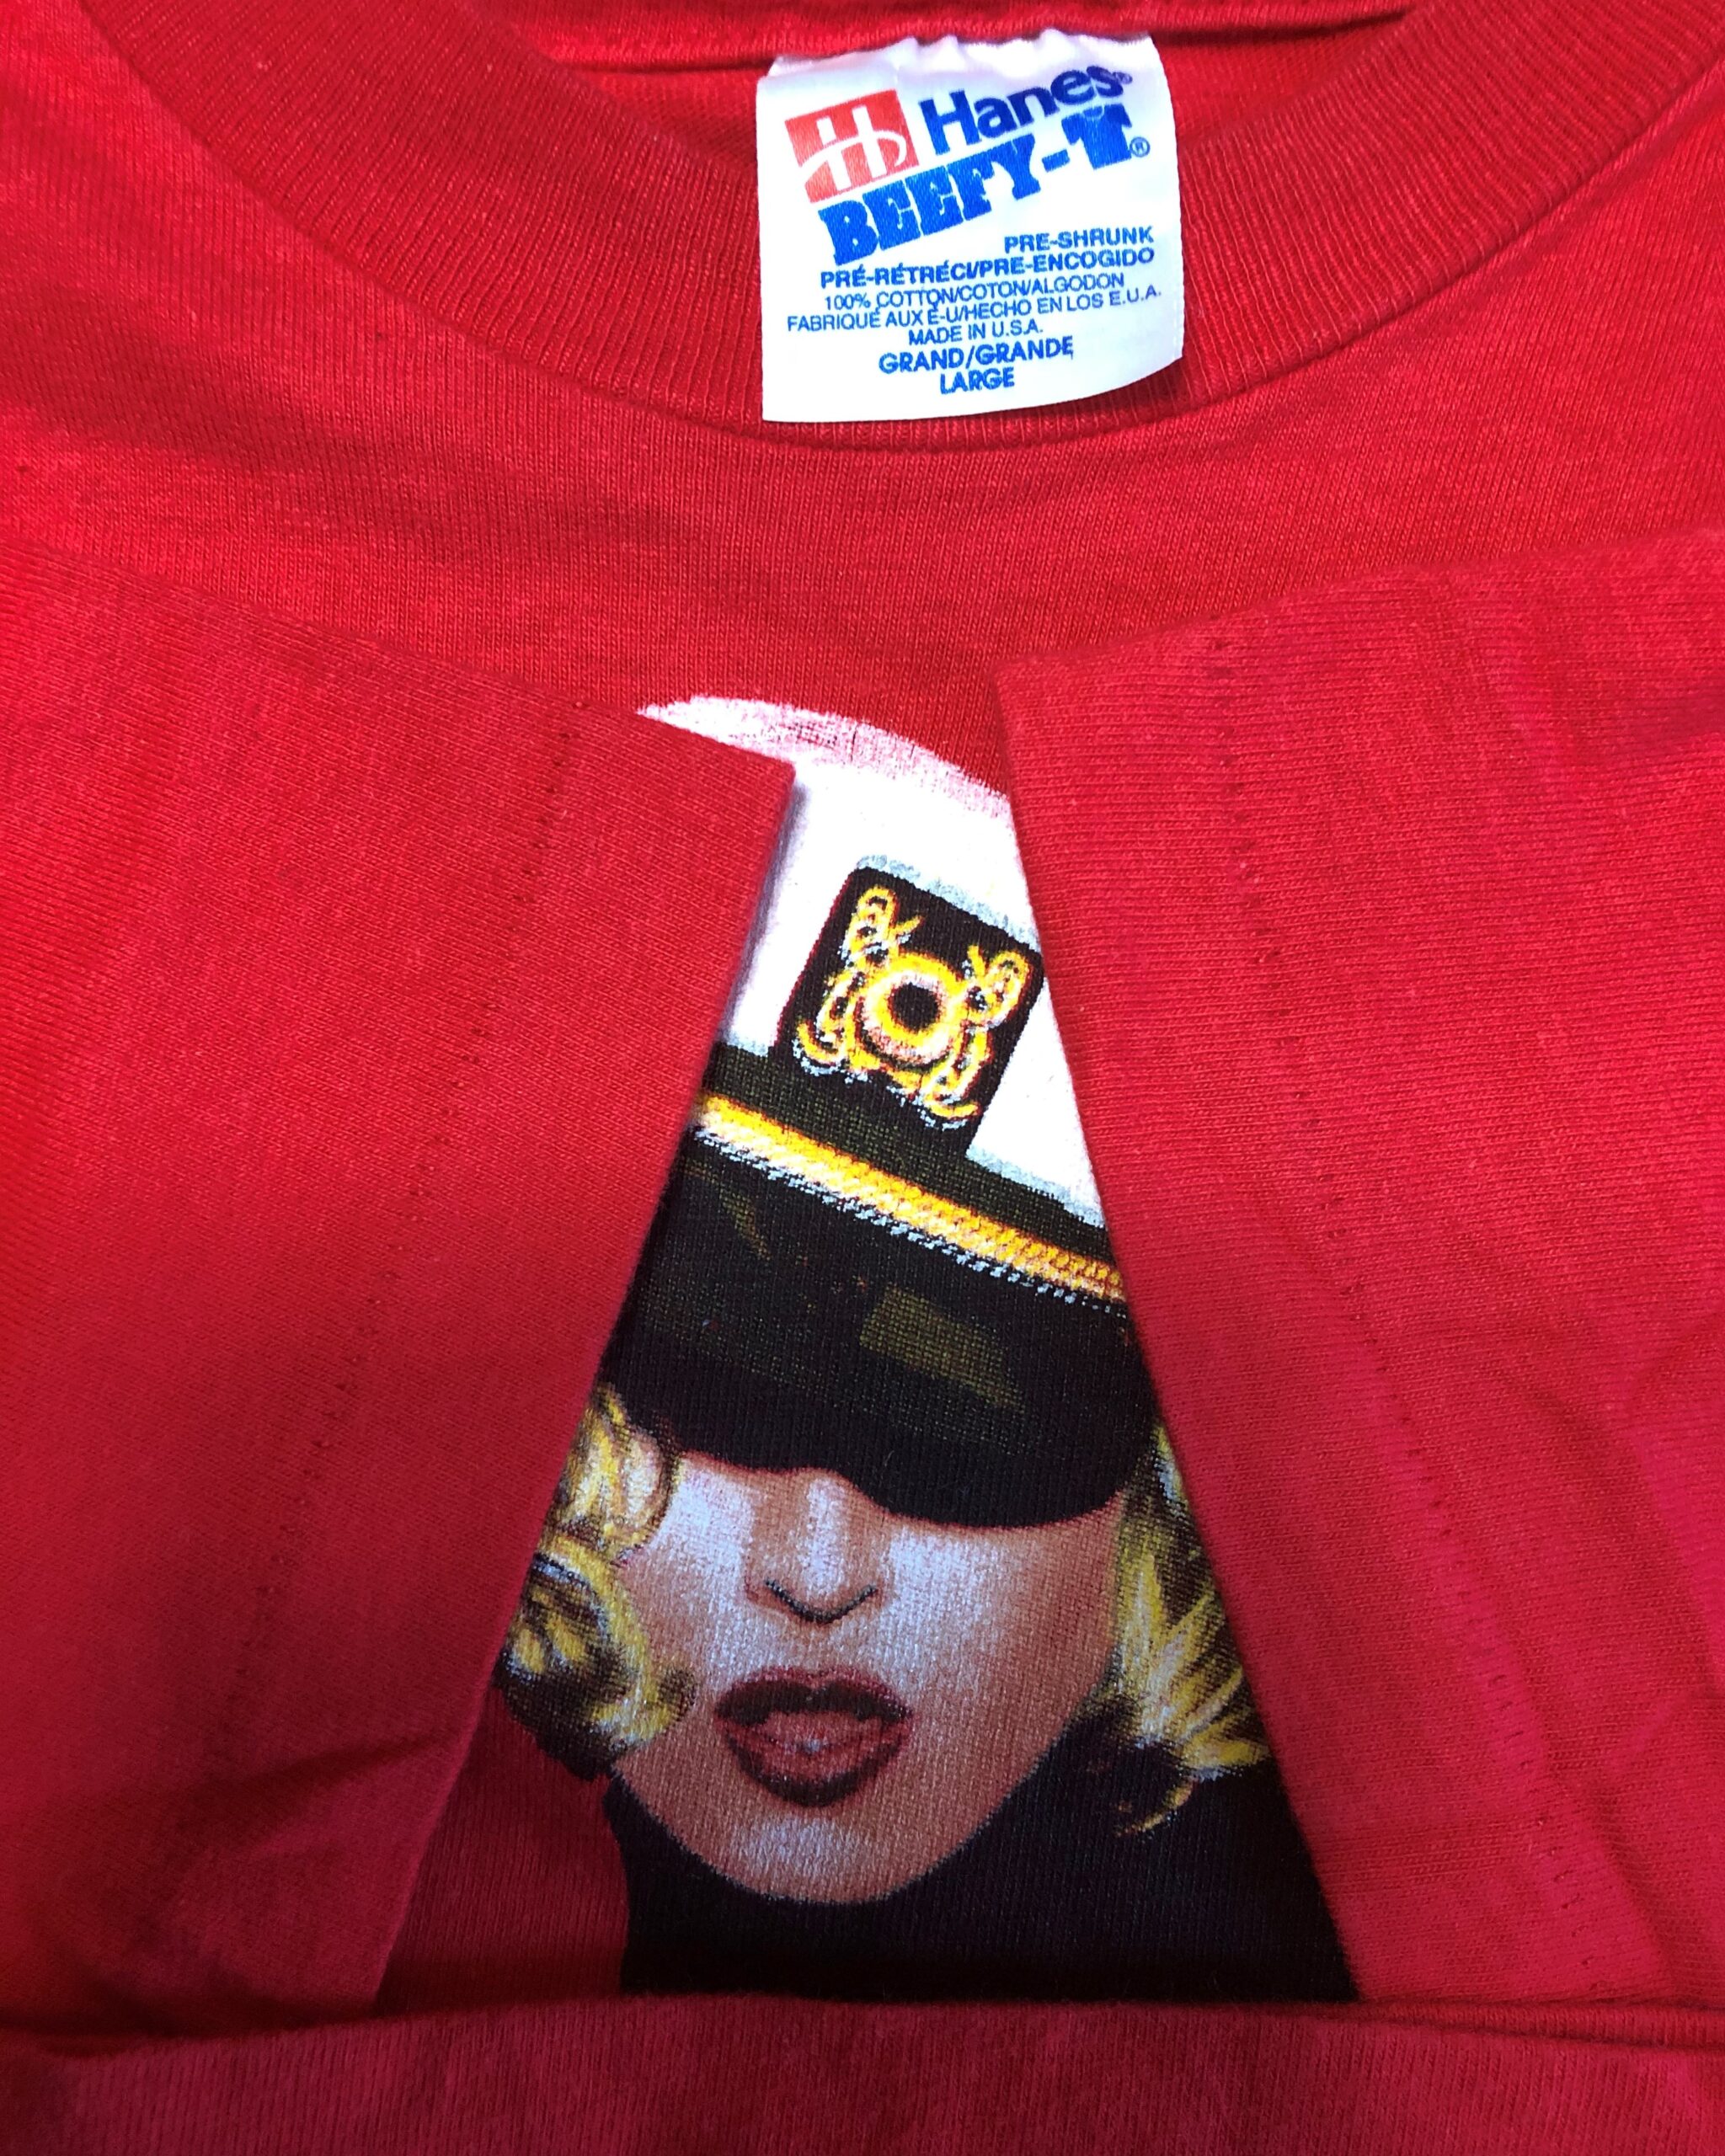 Madonna ☆ Girlie Show World Tour 93′ Tee L size RED | メンズ ...